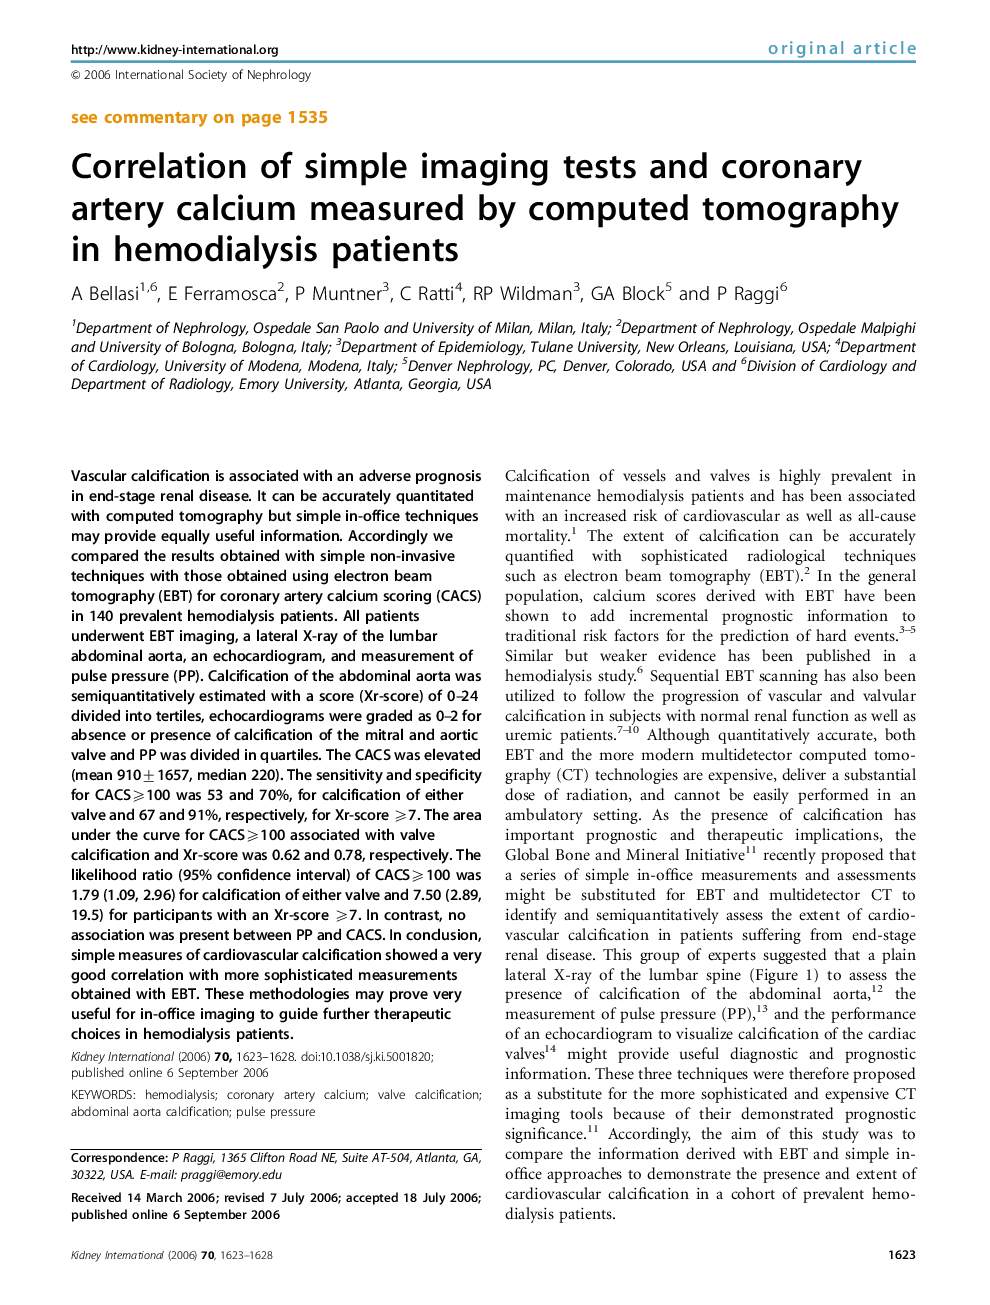 Correlation of simple imaging tests and coronary artery calcium measured by computed tomography in hemodialysis patients